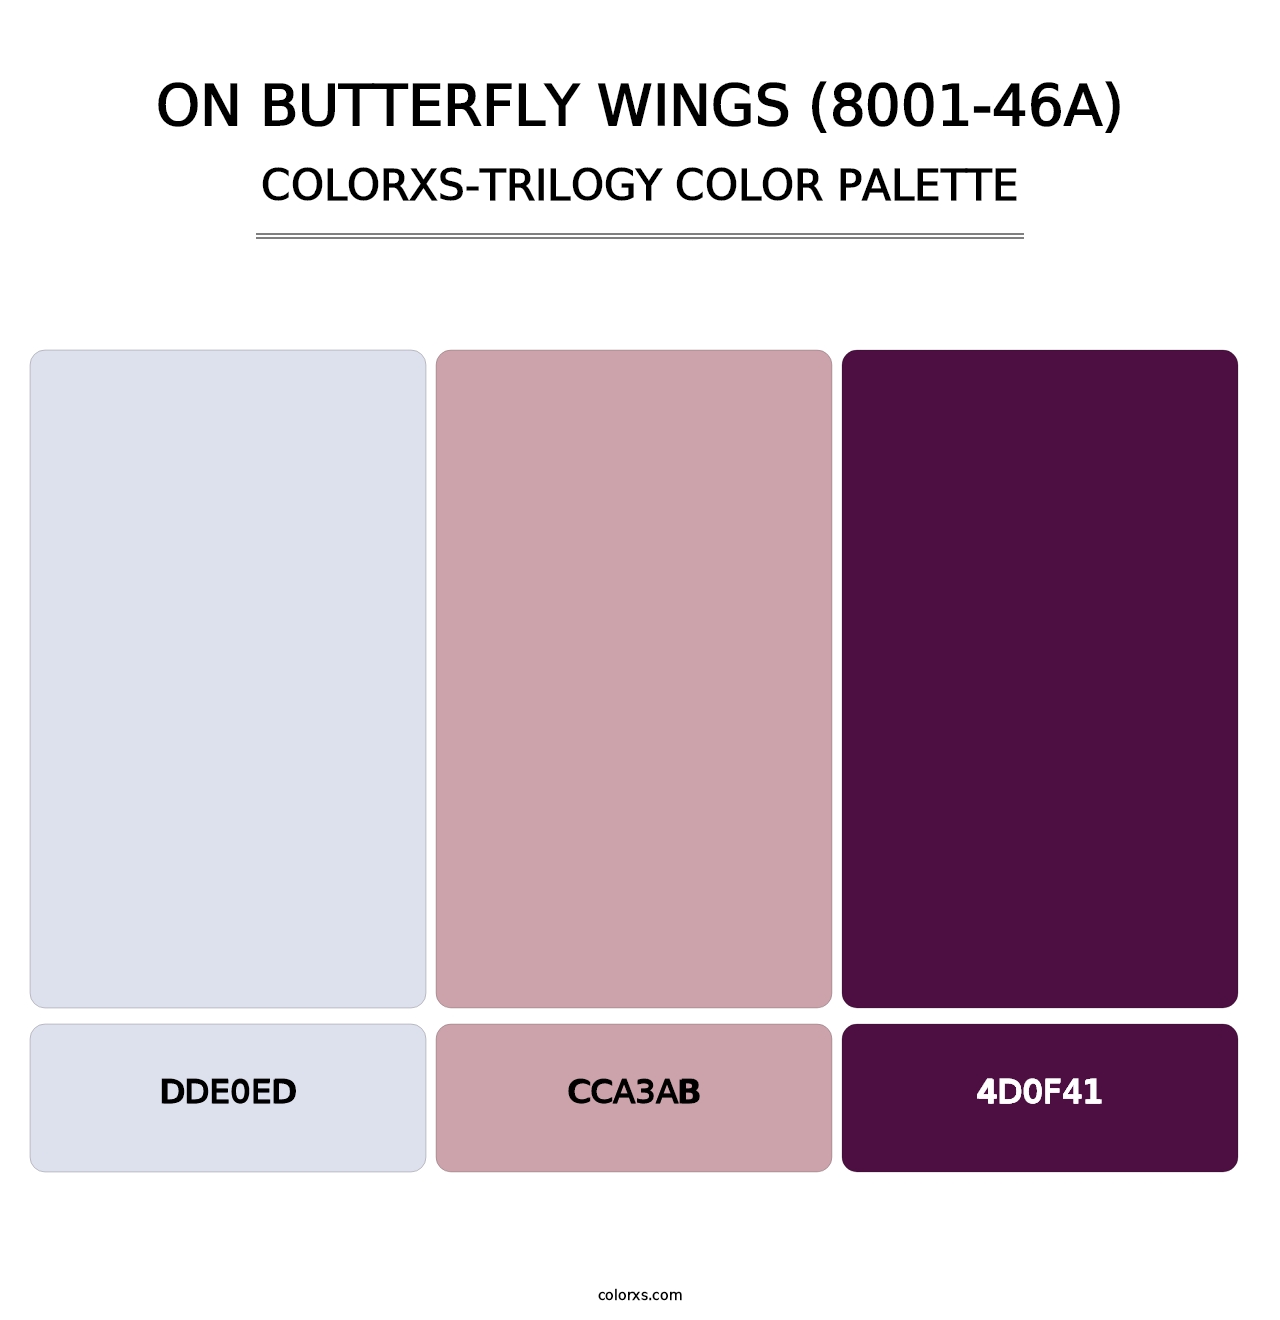 On Butterfly Wings (8001-46A) - Colorxs Trilogy Palette